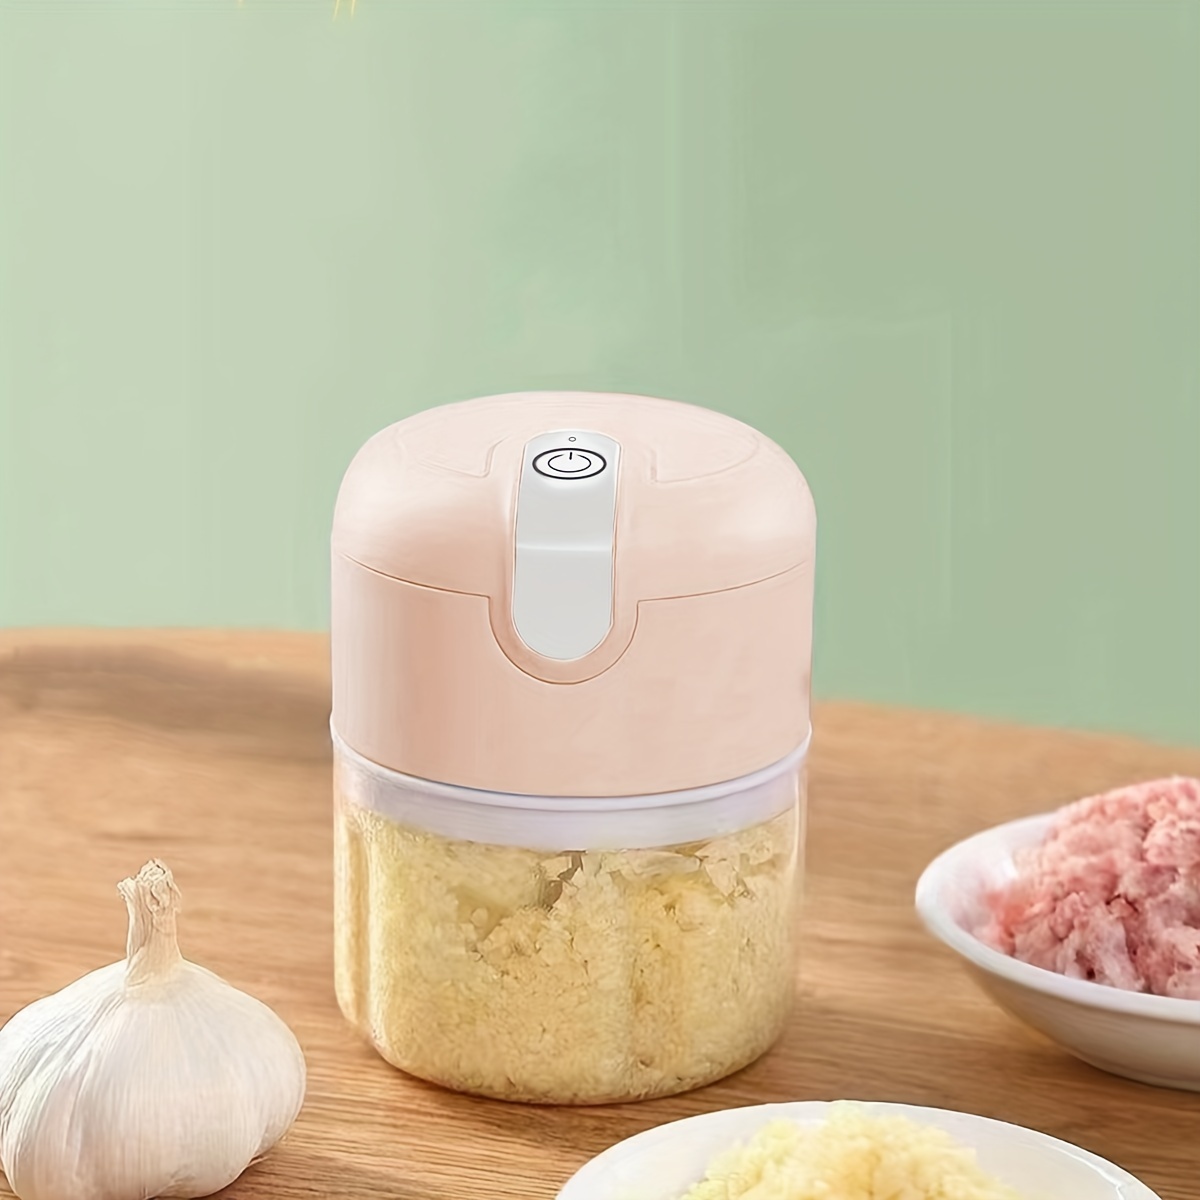 Electric Meat Grinder: Small Household Multifunctional Mincer For Garlic,  Stirring, And Complementary Food Cooking!